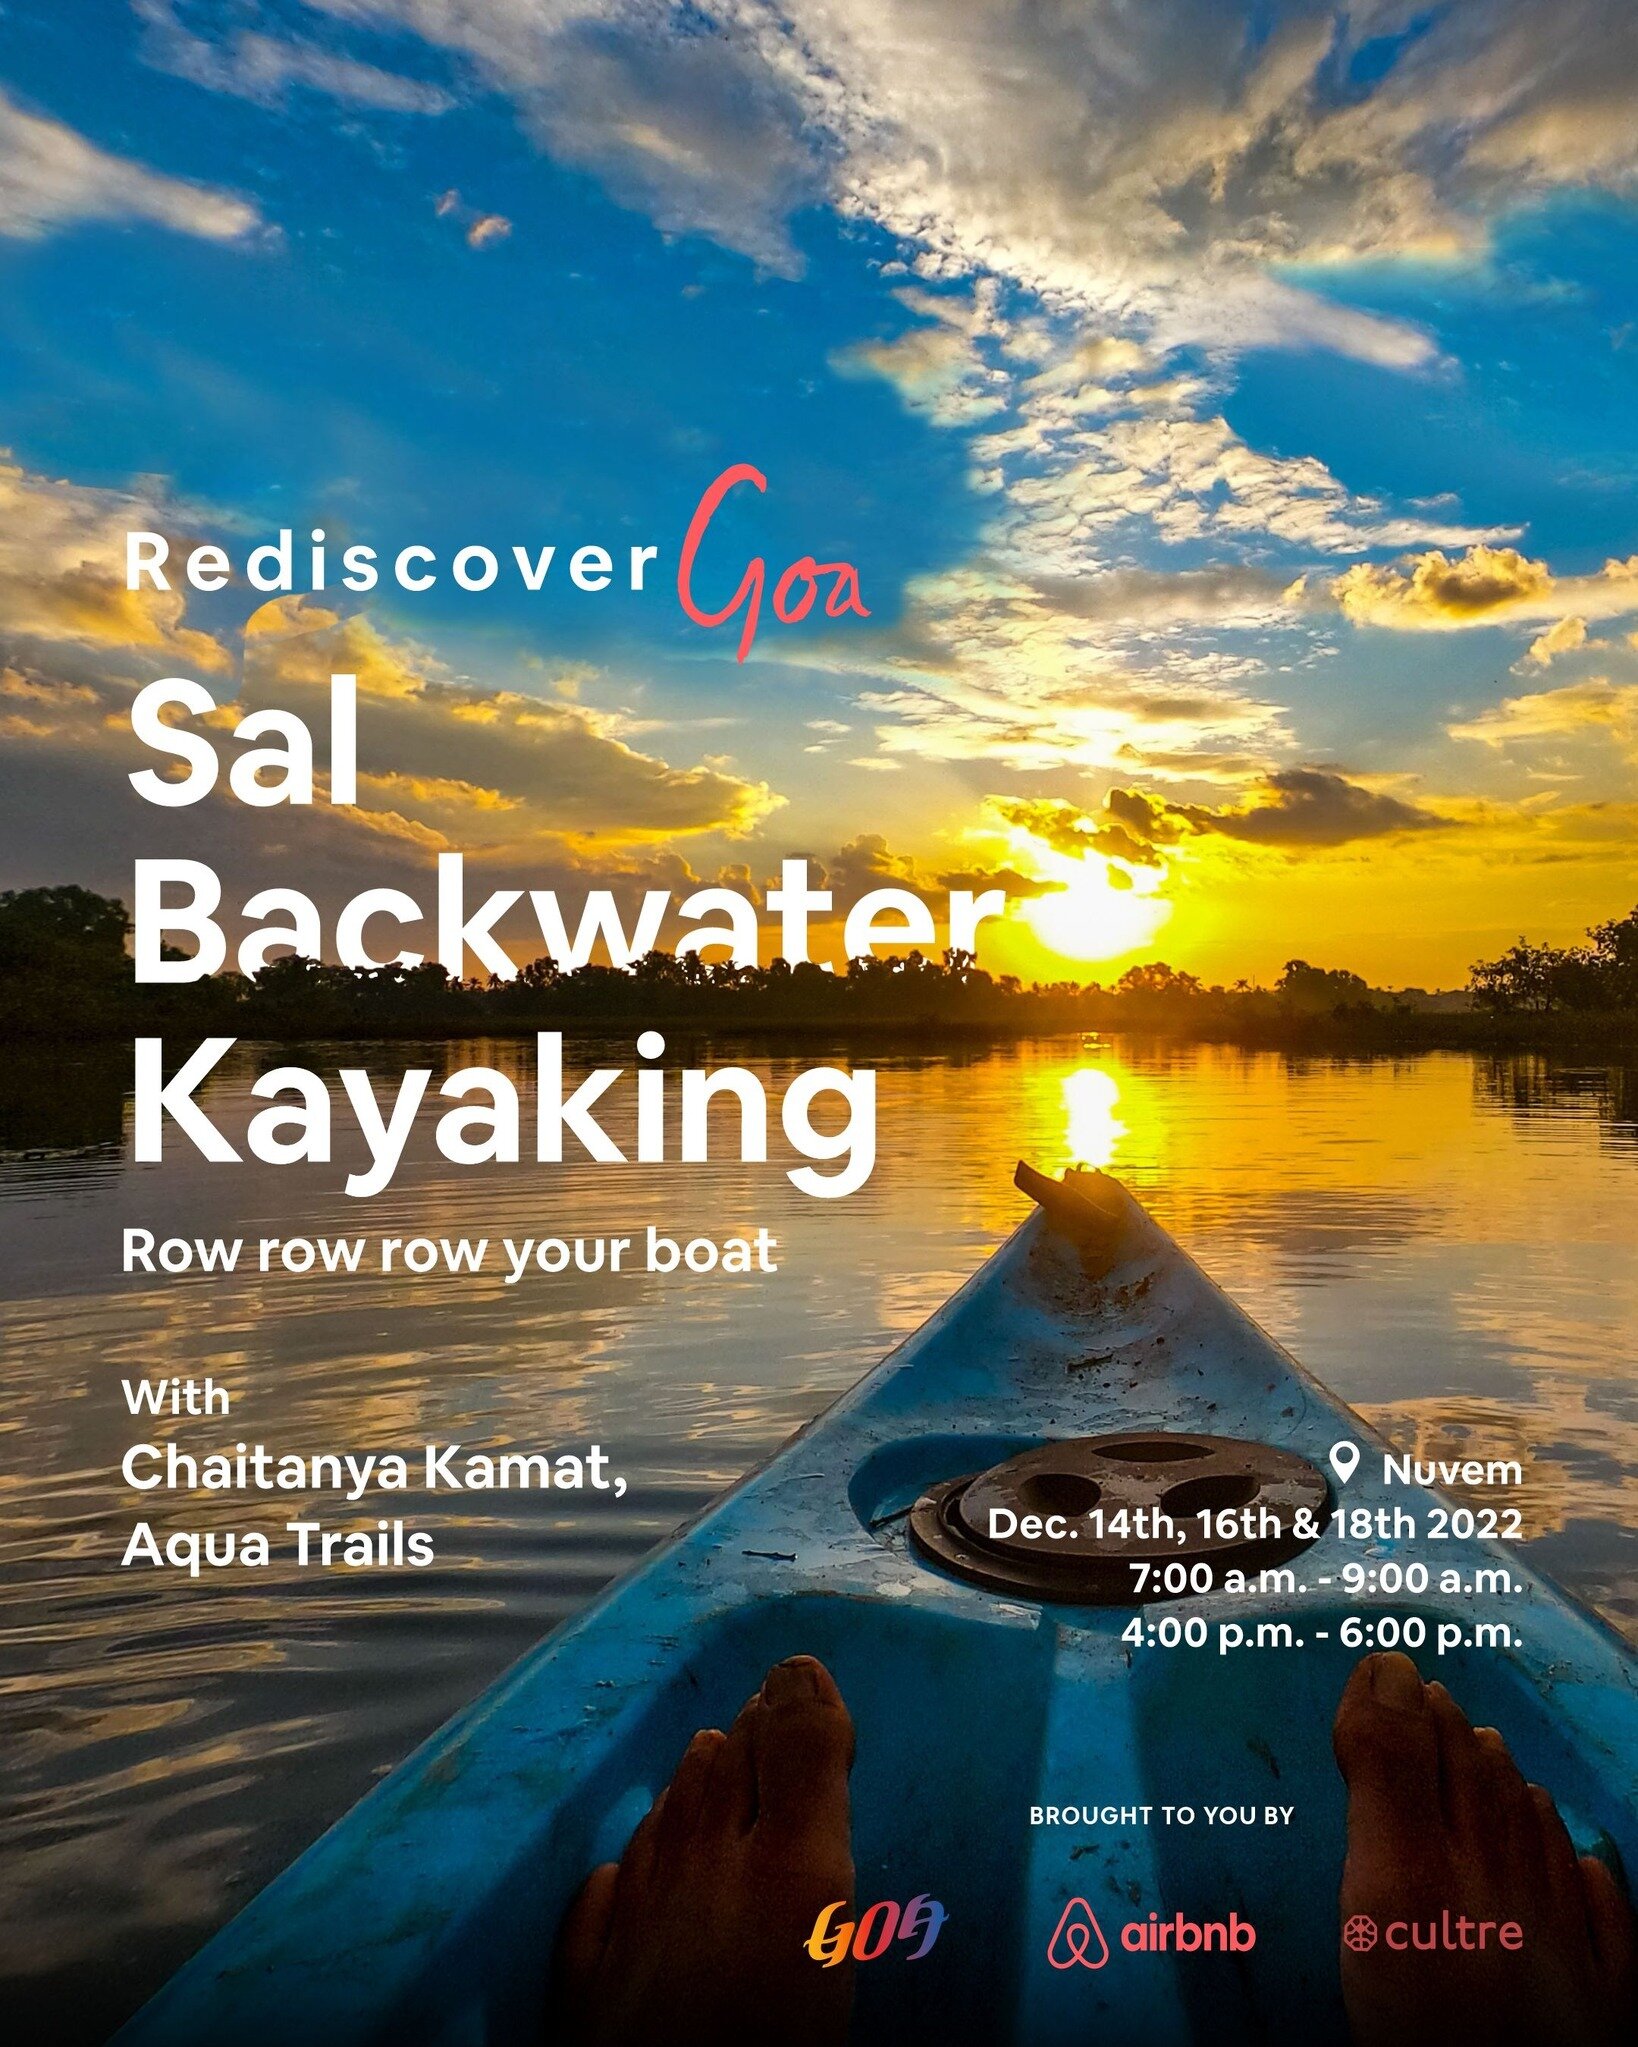 Row through the backwaters of the Sal river while watching a beautiful sunset or a soothing sunrise, whatever you prefer! Get up close with the birds and fishes that make lush ecosystem of the Sal mangroves. Book your spot today; limited spots availa